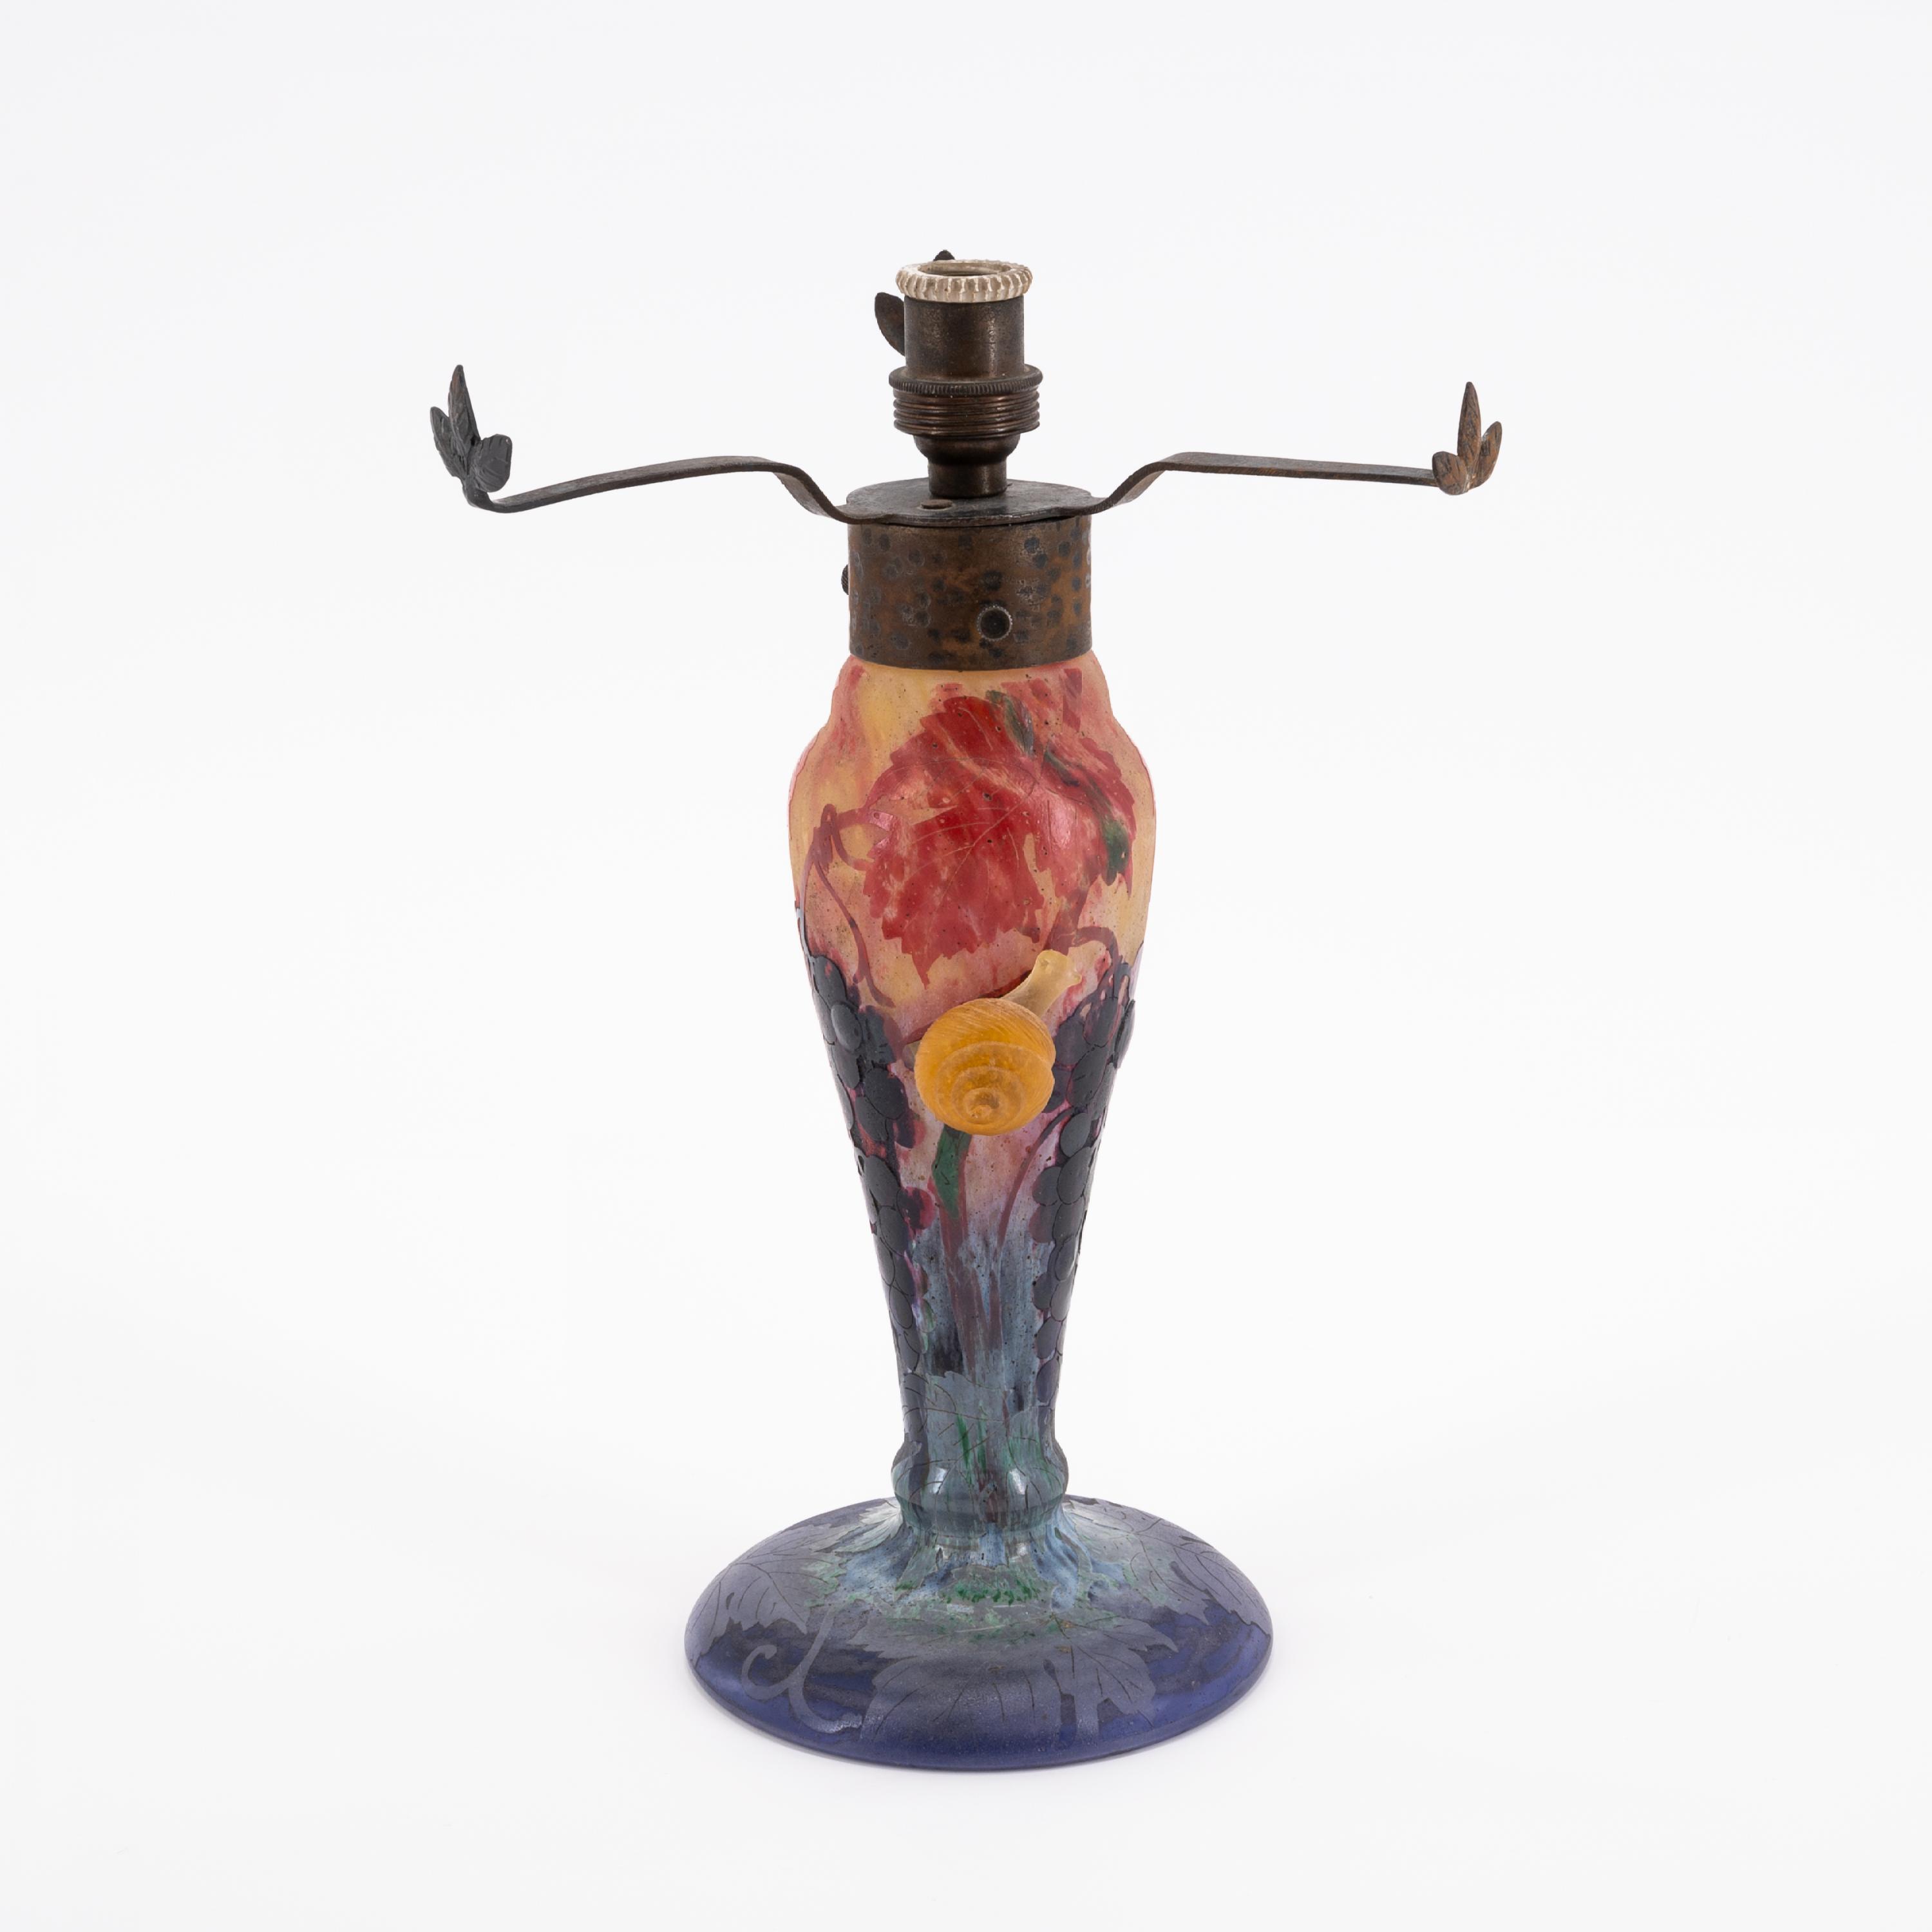 RARE GLASS TABLE LAMP 'VIGNE ET ESCARGOTS' WITH A SNAIL - Image 6 of 10